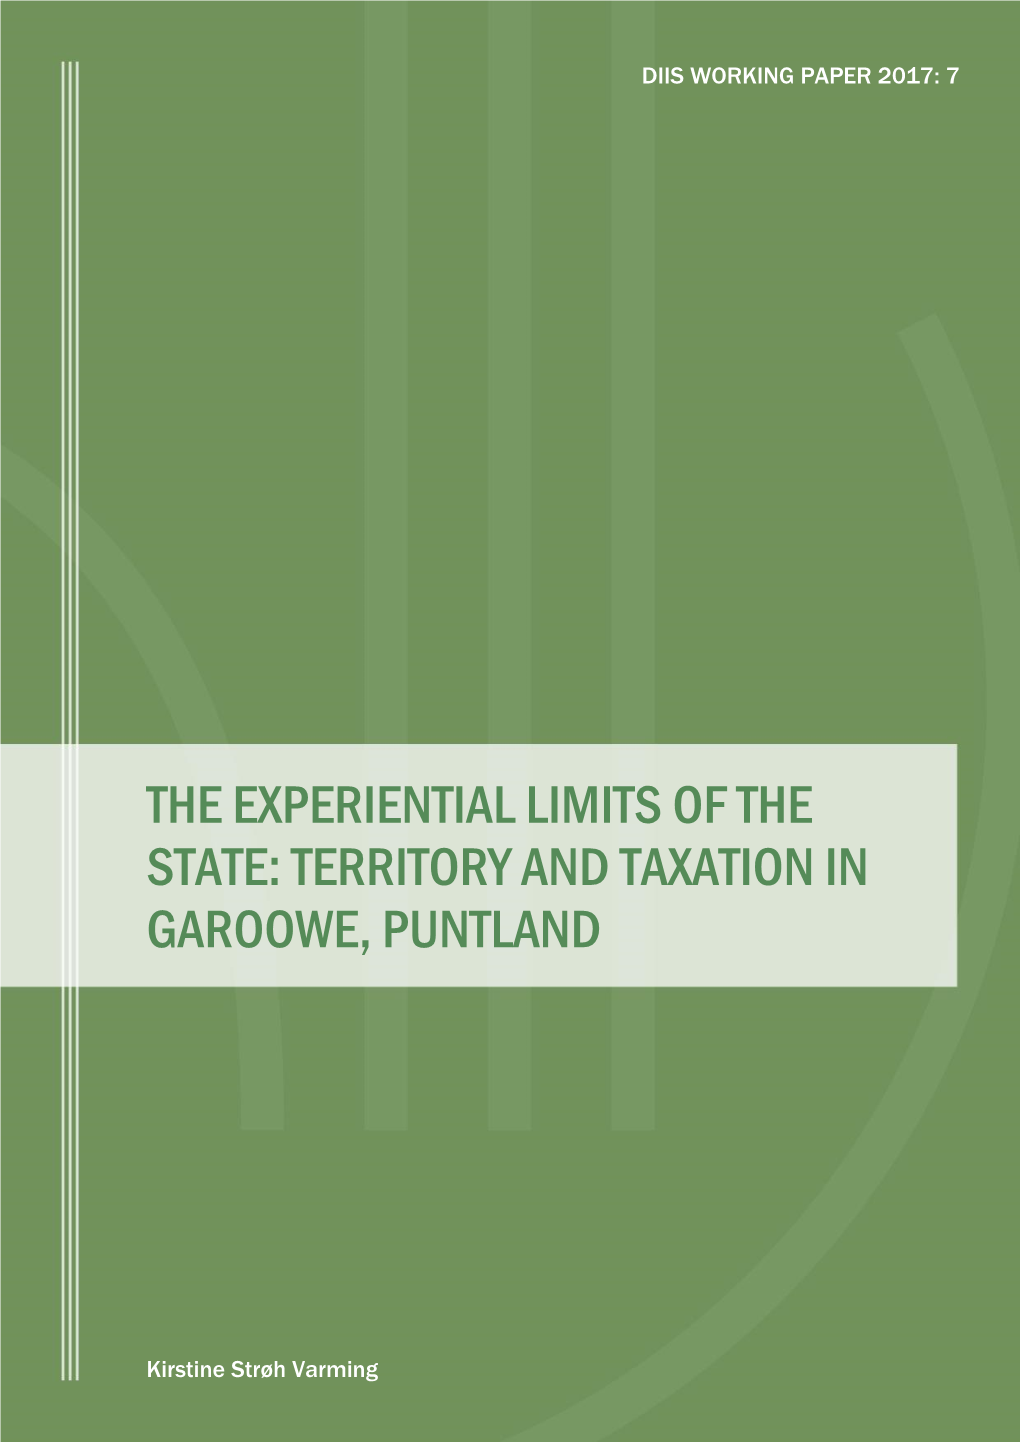 The Experiential Limits of the State: Territory and Taxation in Garoowe, Puntland